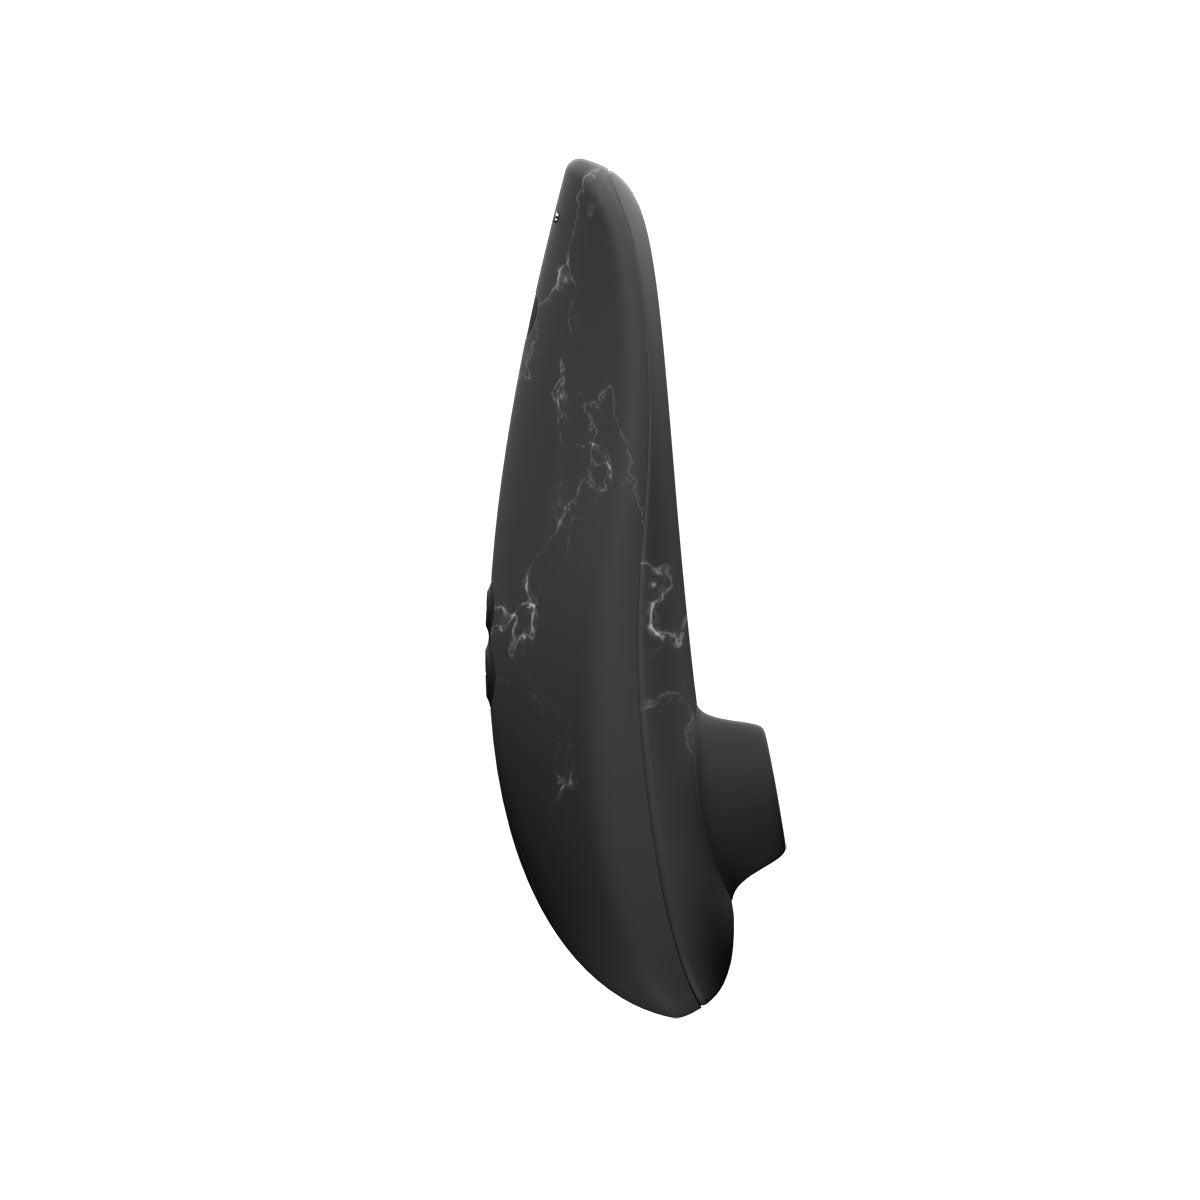 Womanizer Intimacy Devices Womanizer Classic 2 Marilyn Monroe Special Edition - Black Marble